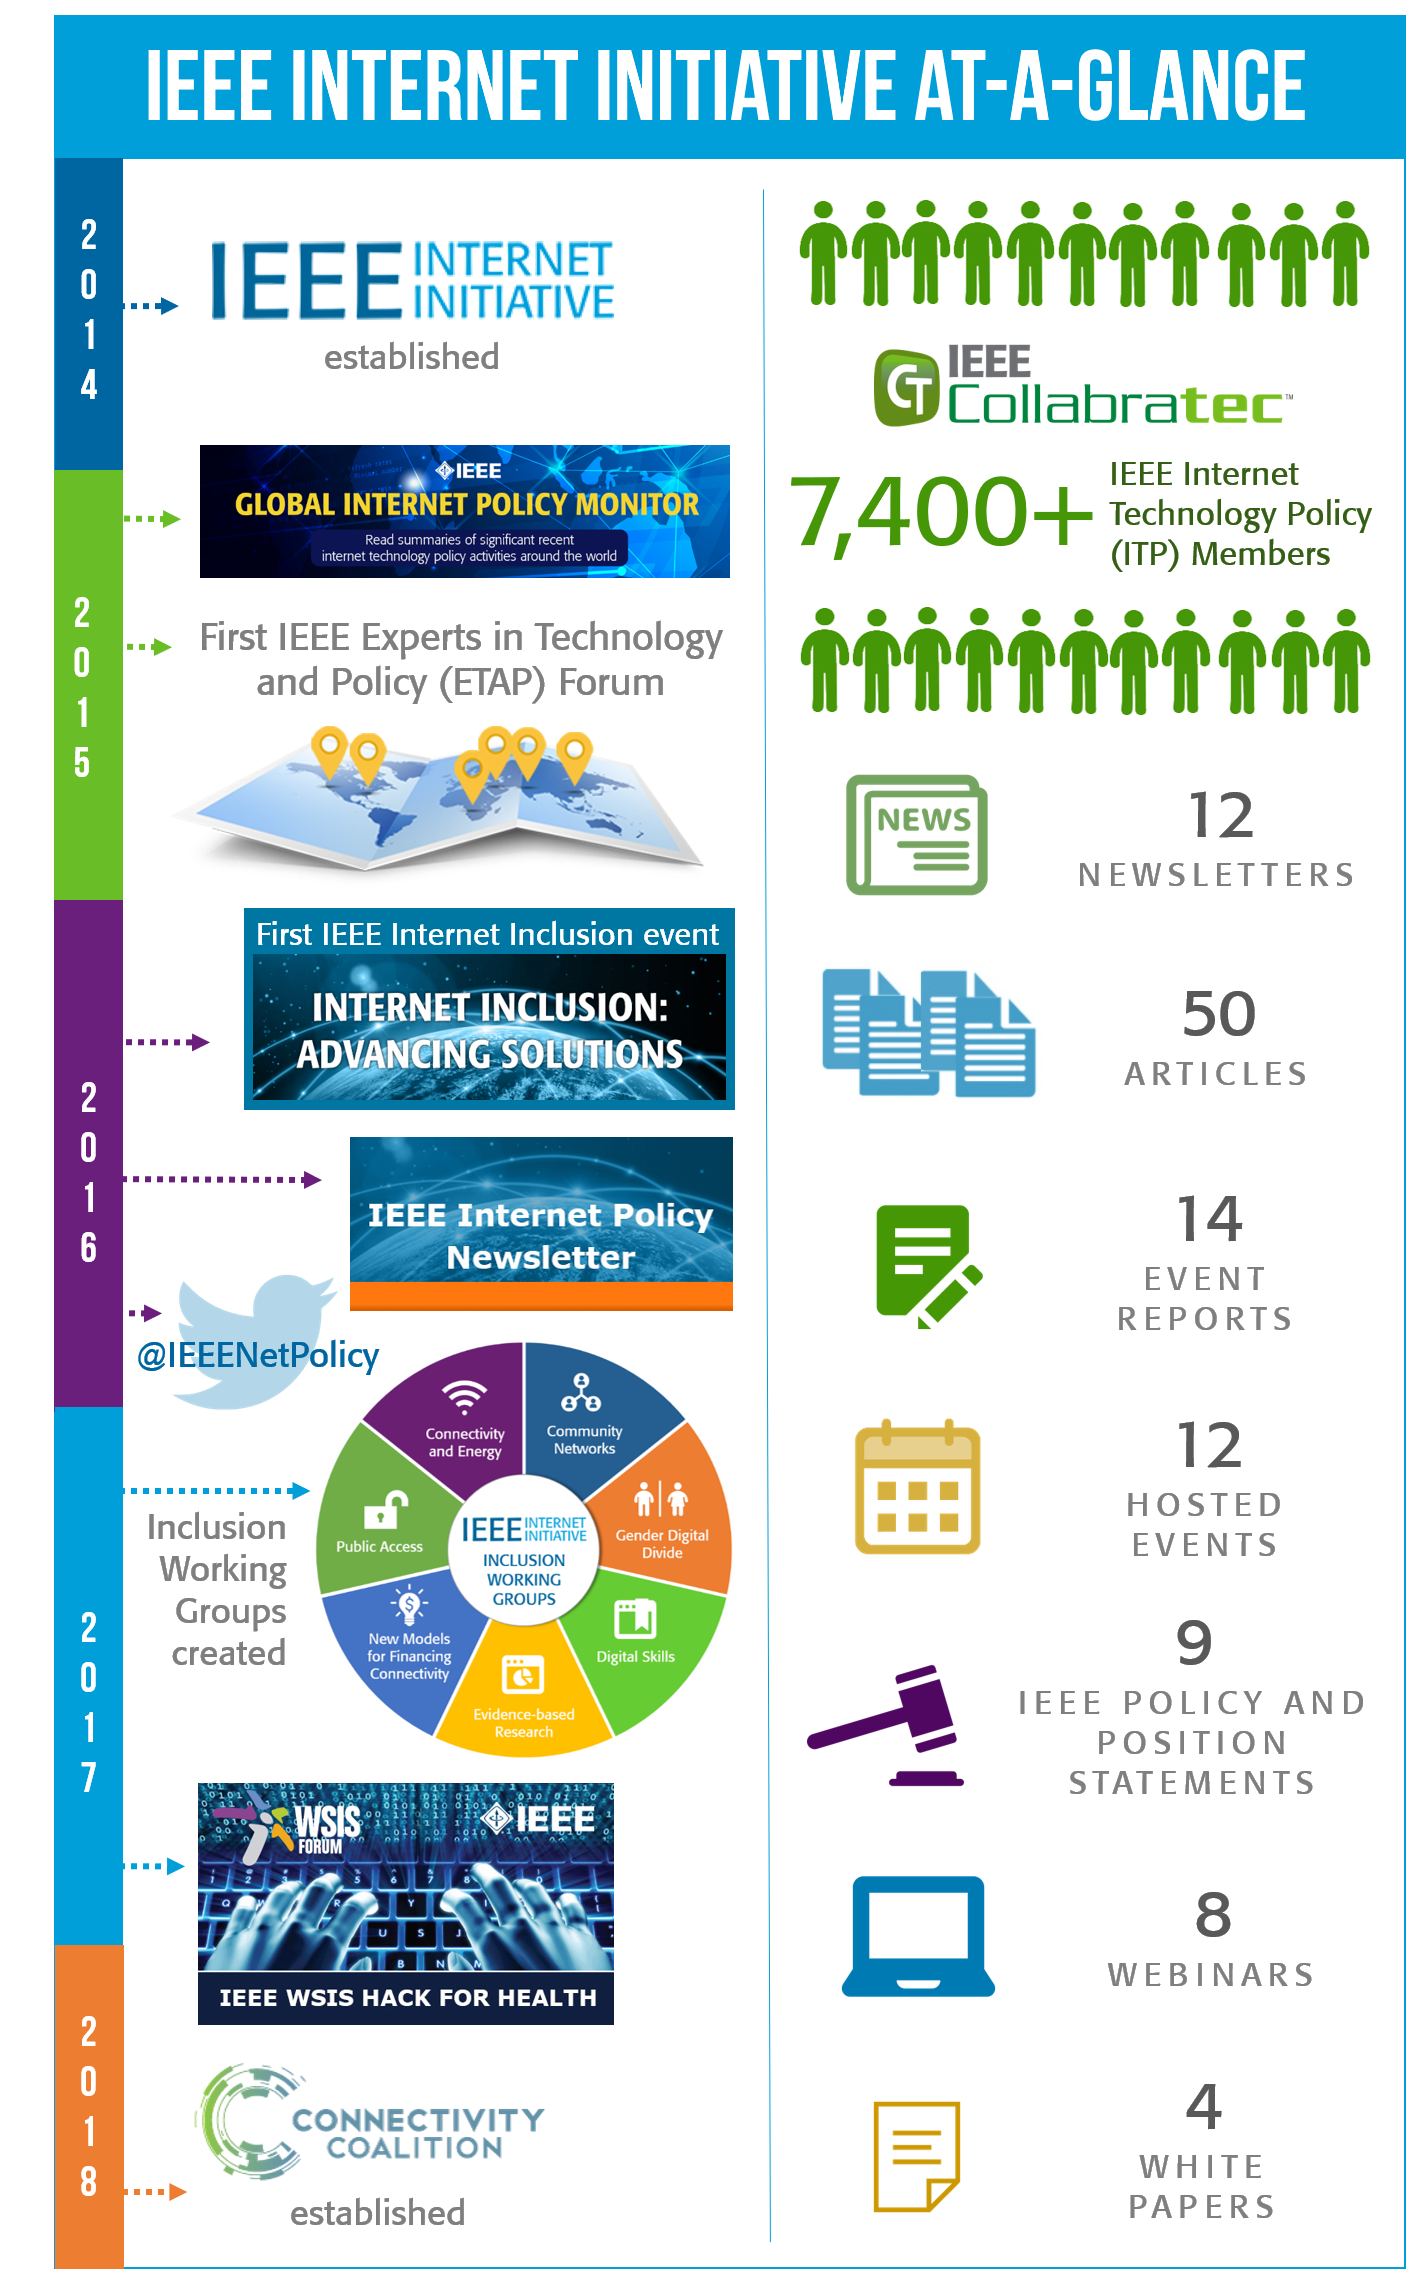 IEEE Internet Initiative at a glance